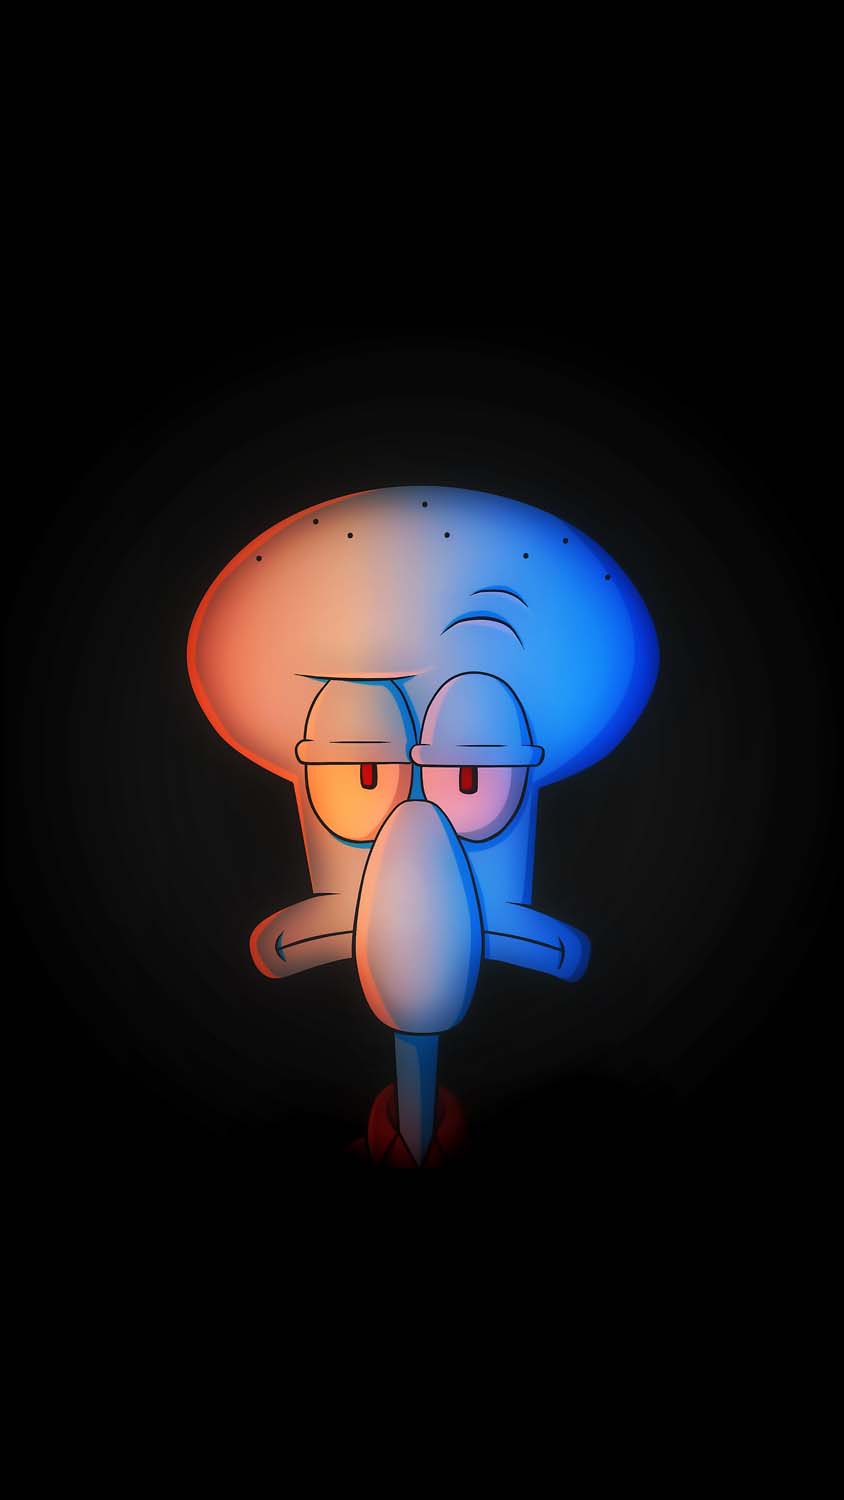 Squidward IPhone Wallpaper HD - IPhone Wallpapers : iPhone Wallpapers